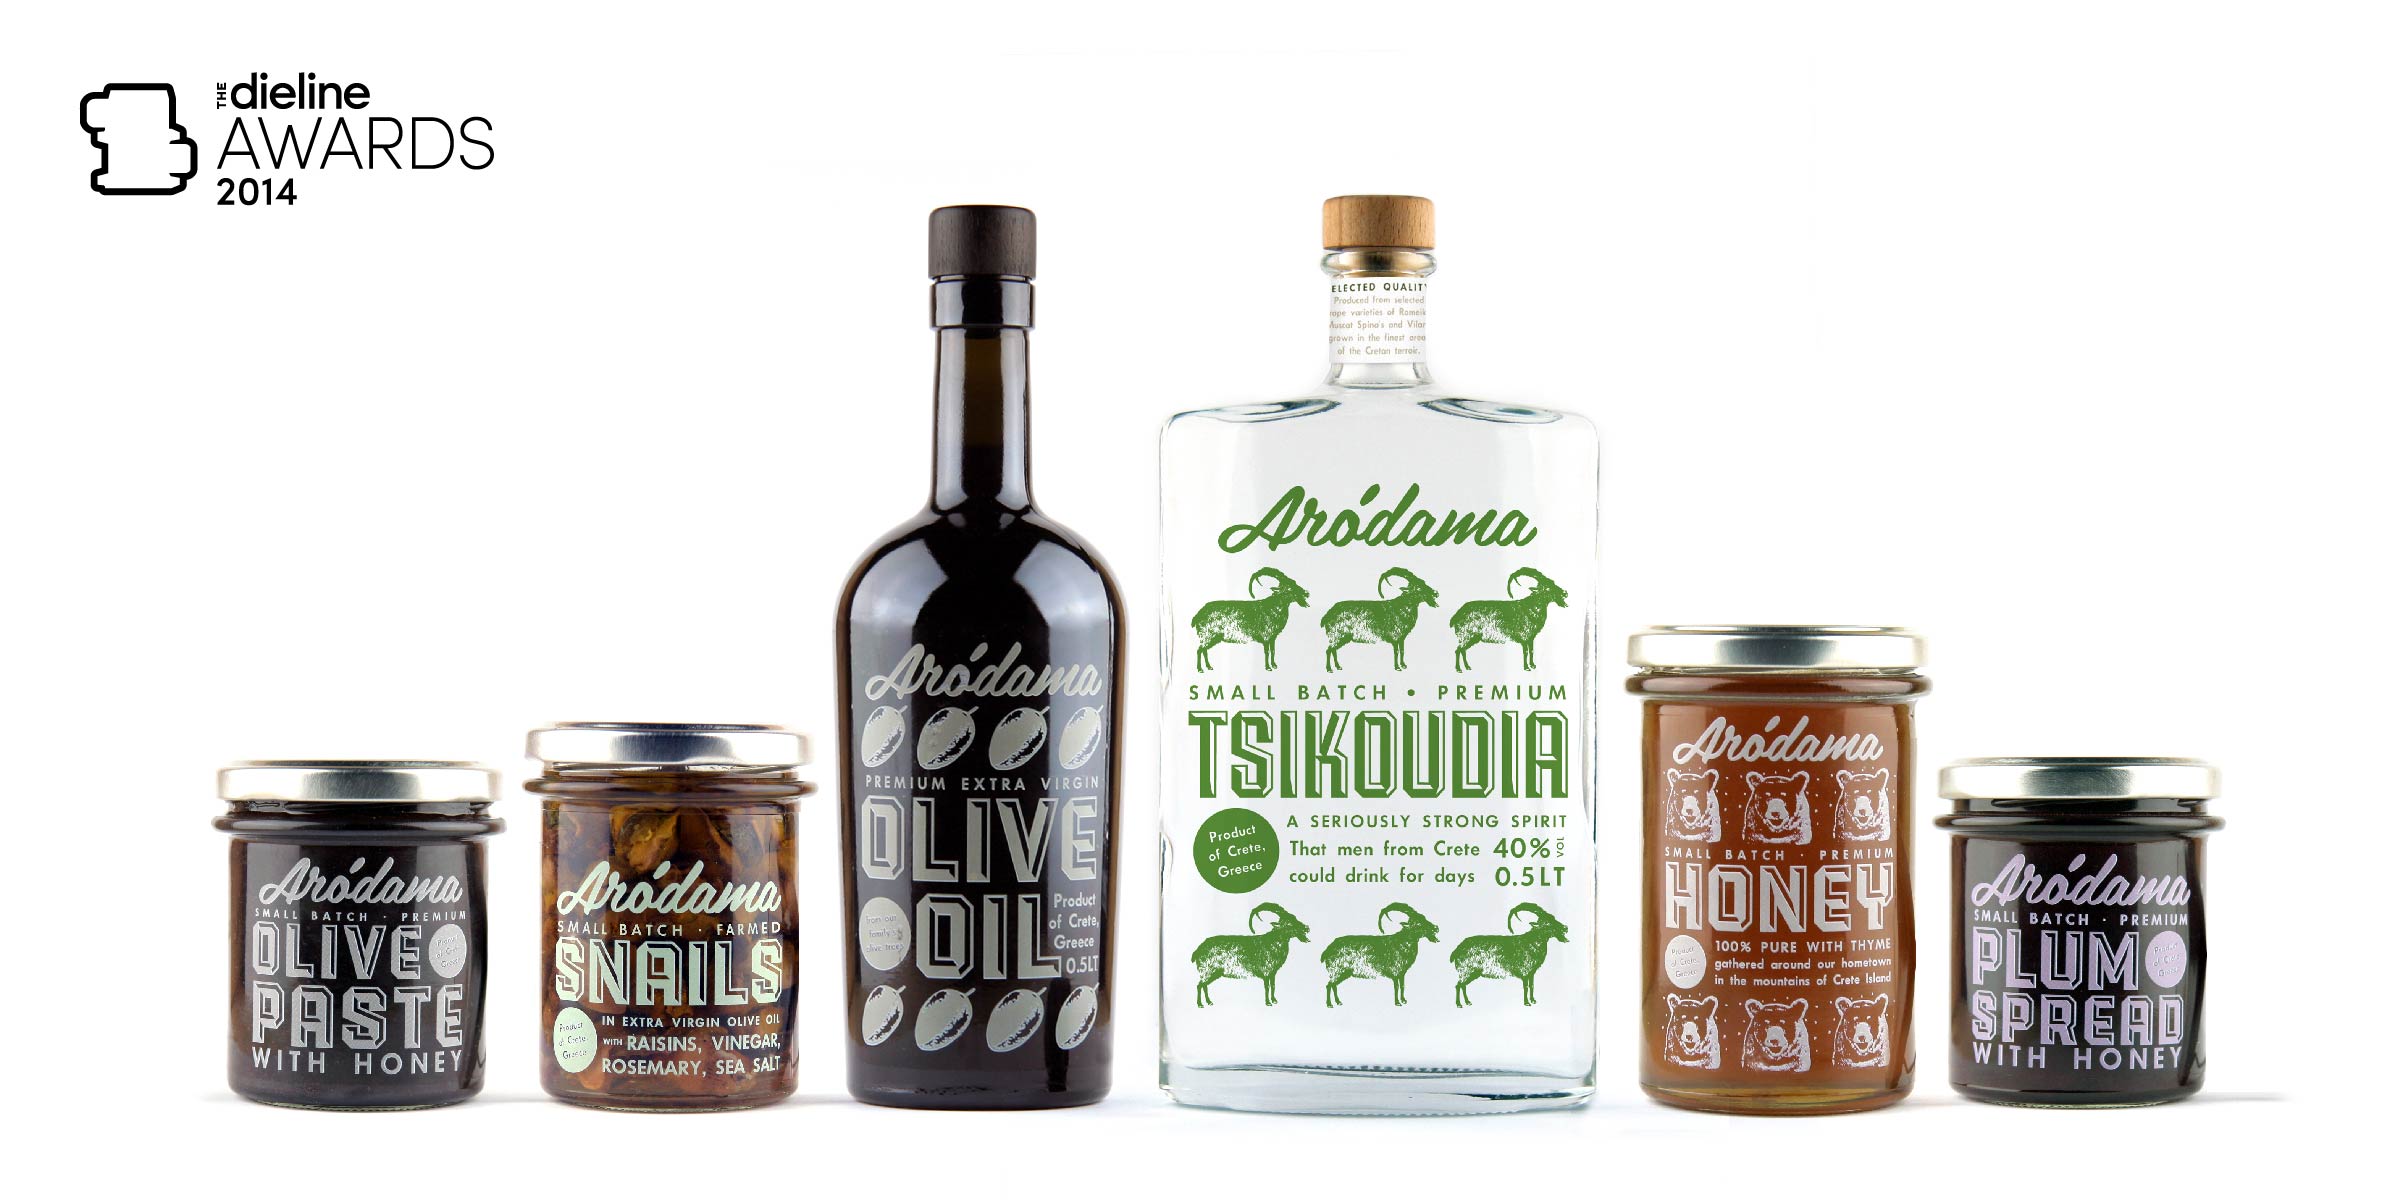 The Dieline Awards 2014: Multi-Category Product Line, 2nd Place – Arodama